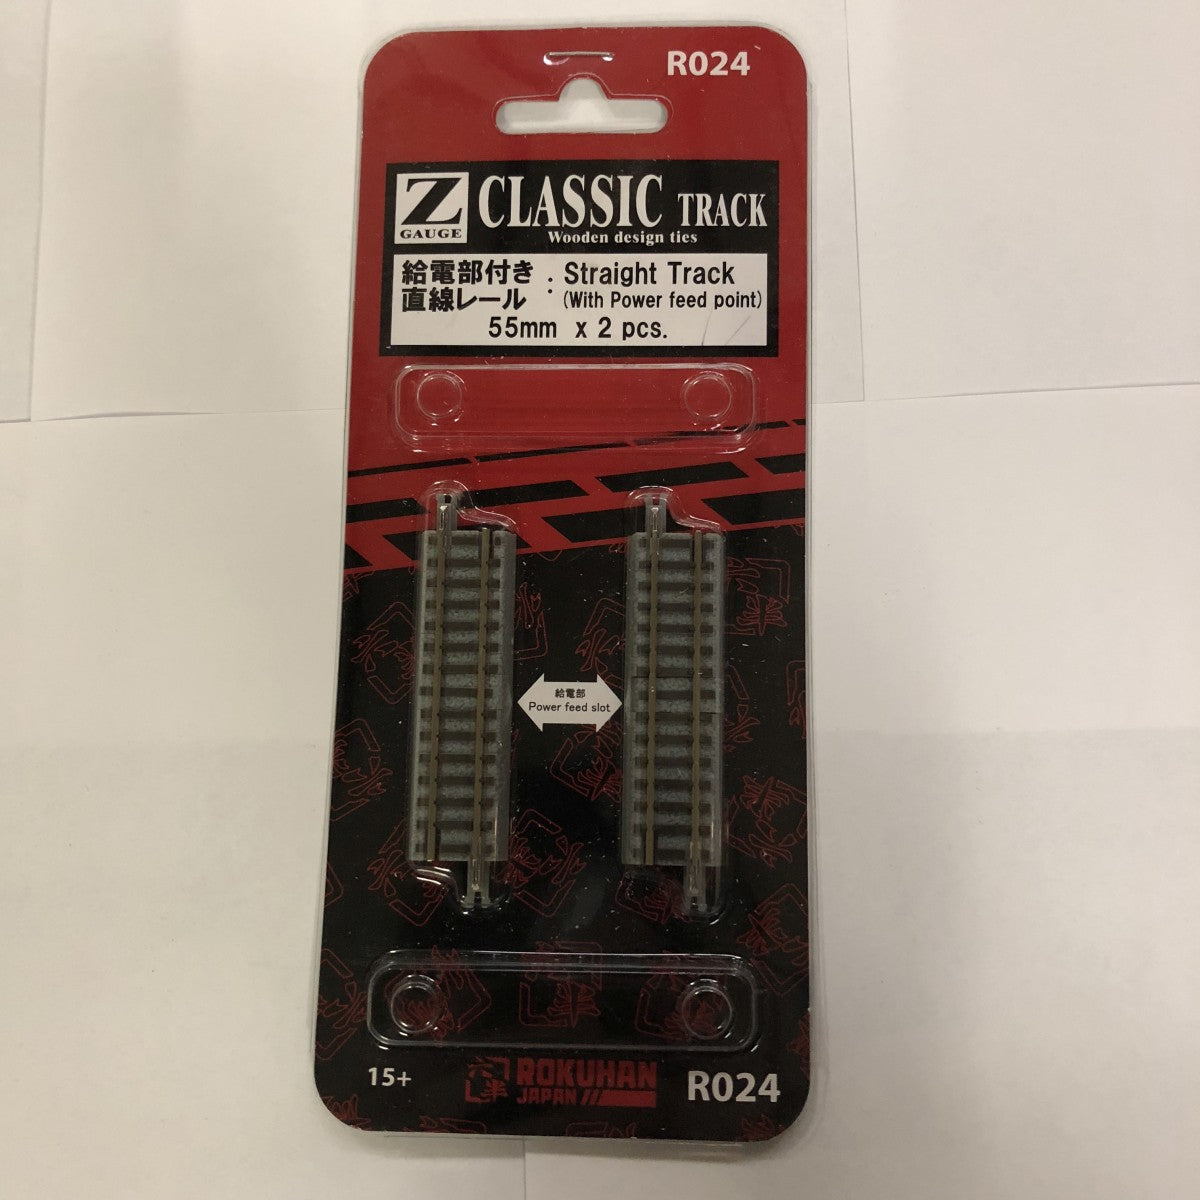 Rokuhan R024 Z Guage Classic Straight Track W/Power Feed Point 55mm (Pack of 2)